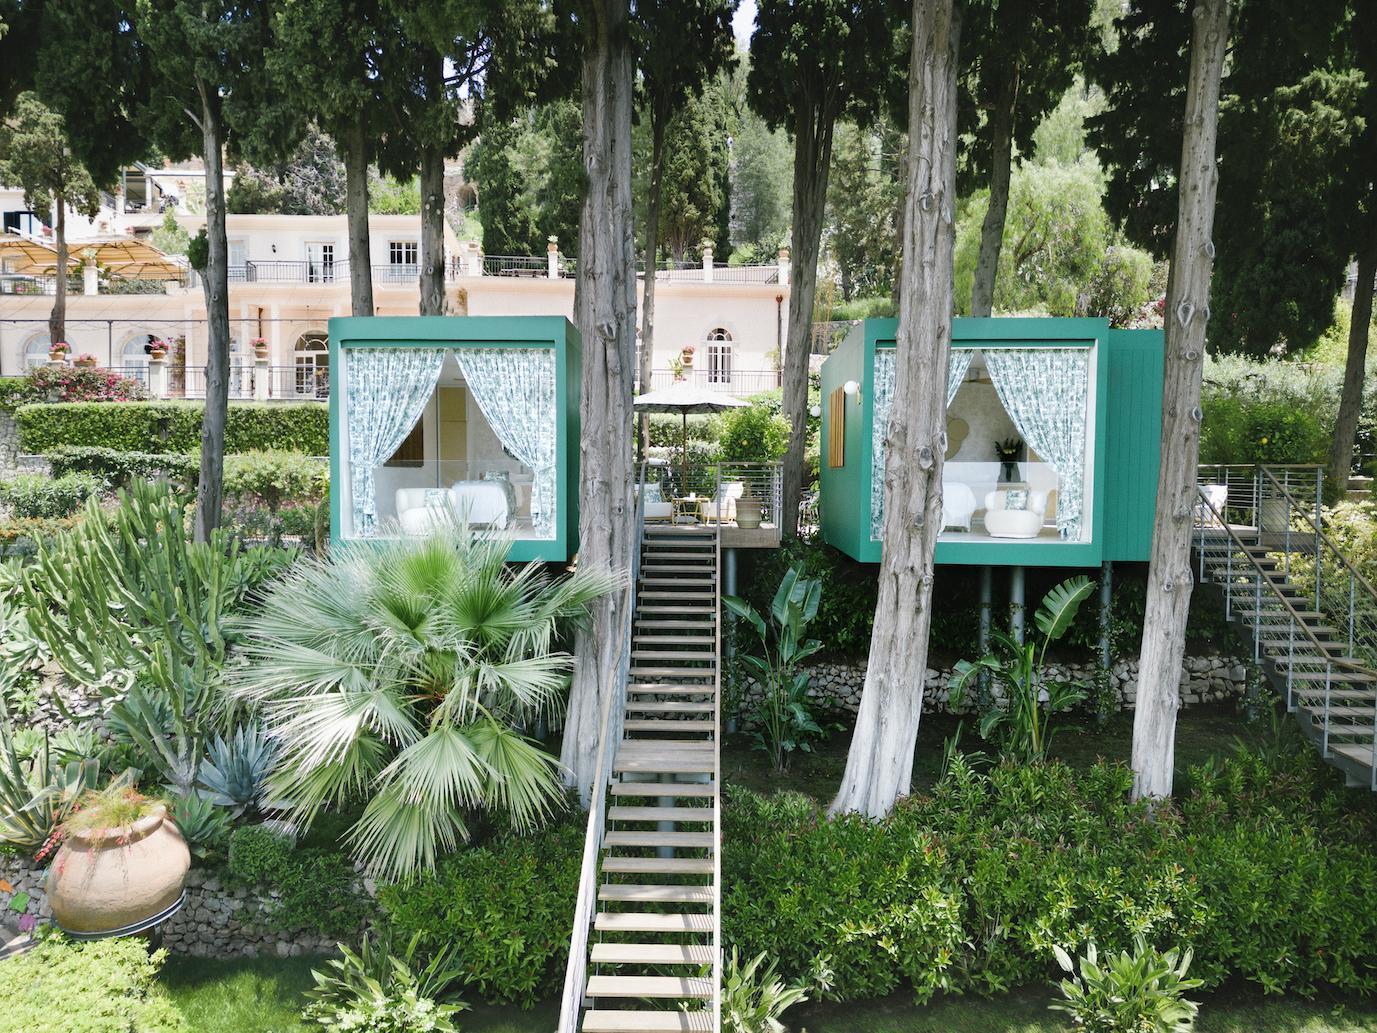 Spend Your Summer in Belmond and Dior's Spa Treehouses at Grand Hotel Timeo in Italy